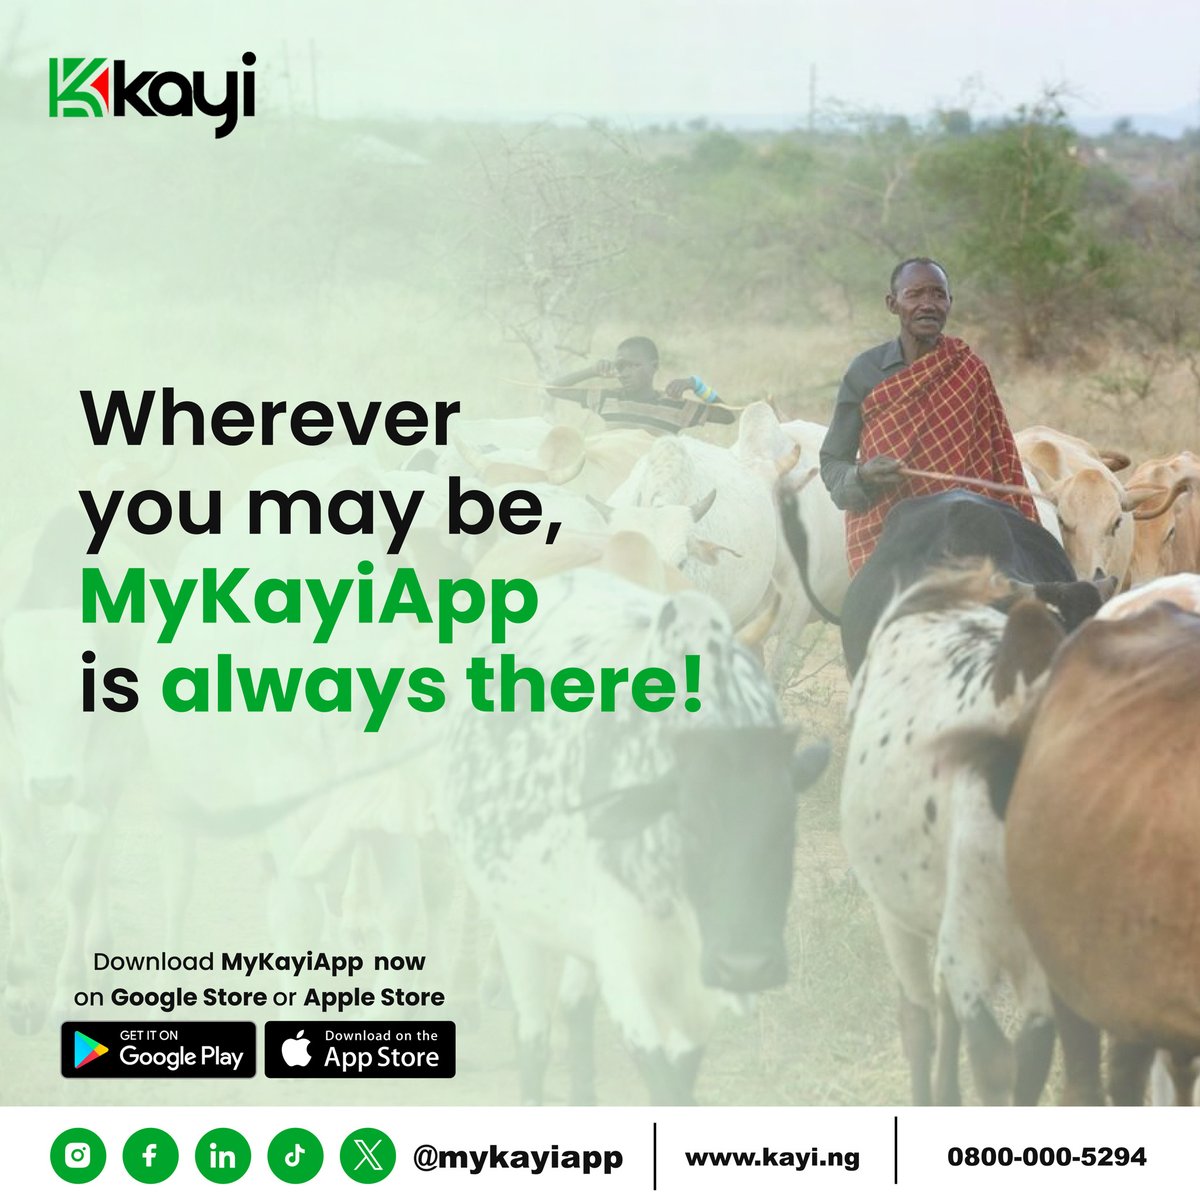 Wherever you may be, Kayiapp stands ready to streamline your transactions. Download now from the Google Play Store and Apple App Store to enjoy the benefits of seamless banking.

#MyKayiApp #NowLive #Kayiway #DownloadNow #Bankingwithoutlimits #downloadmykayiapp